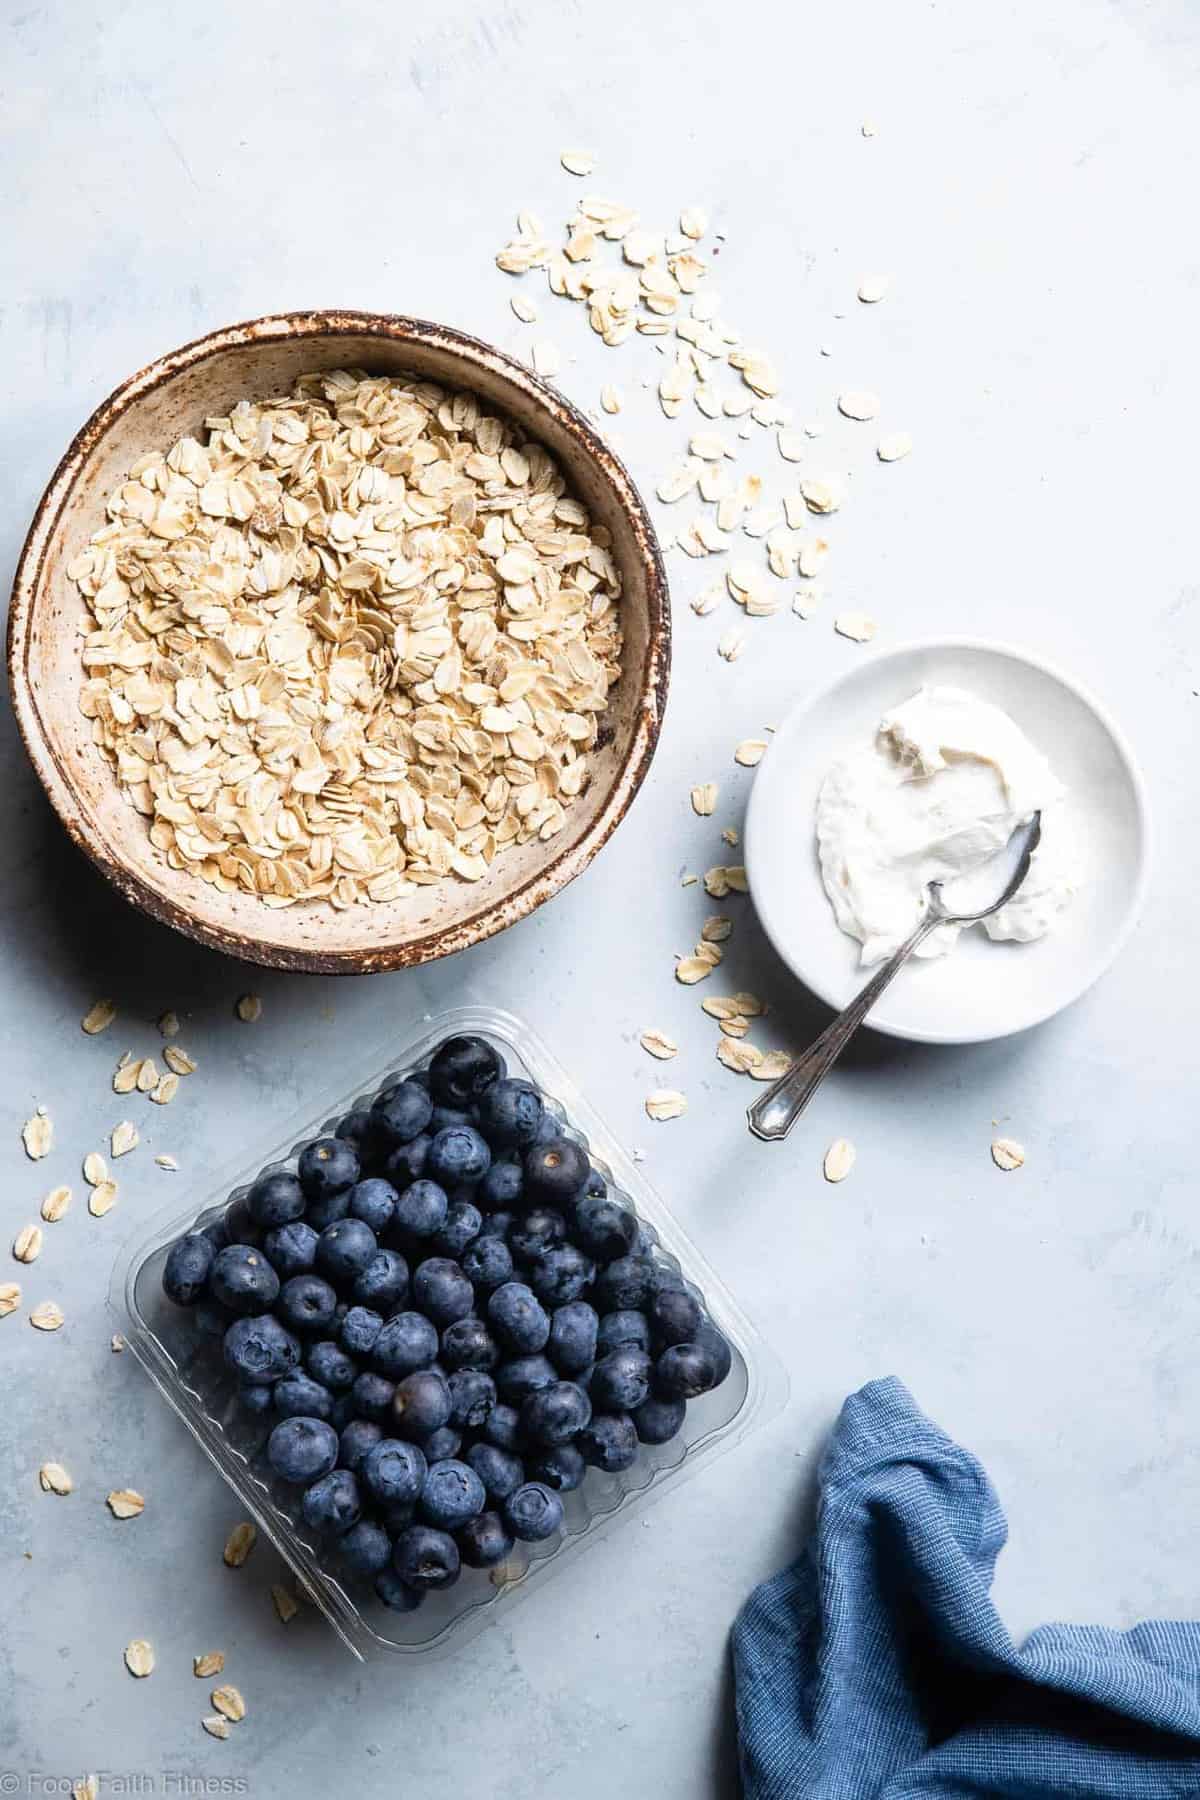 Blueberry Cheesecake Oatmeal - This quick and easy Blueberry Oatmeal with Cheesecake Swirl is a healthy, low fat and gluten free breakfast that tastes like waking up to cheesecake! | #Foodfaithfitness | 